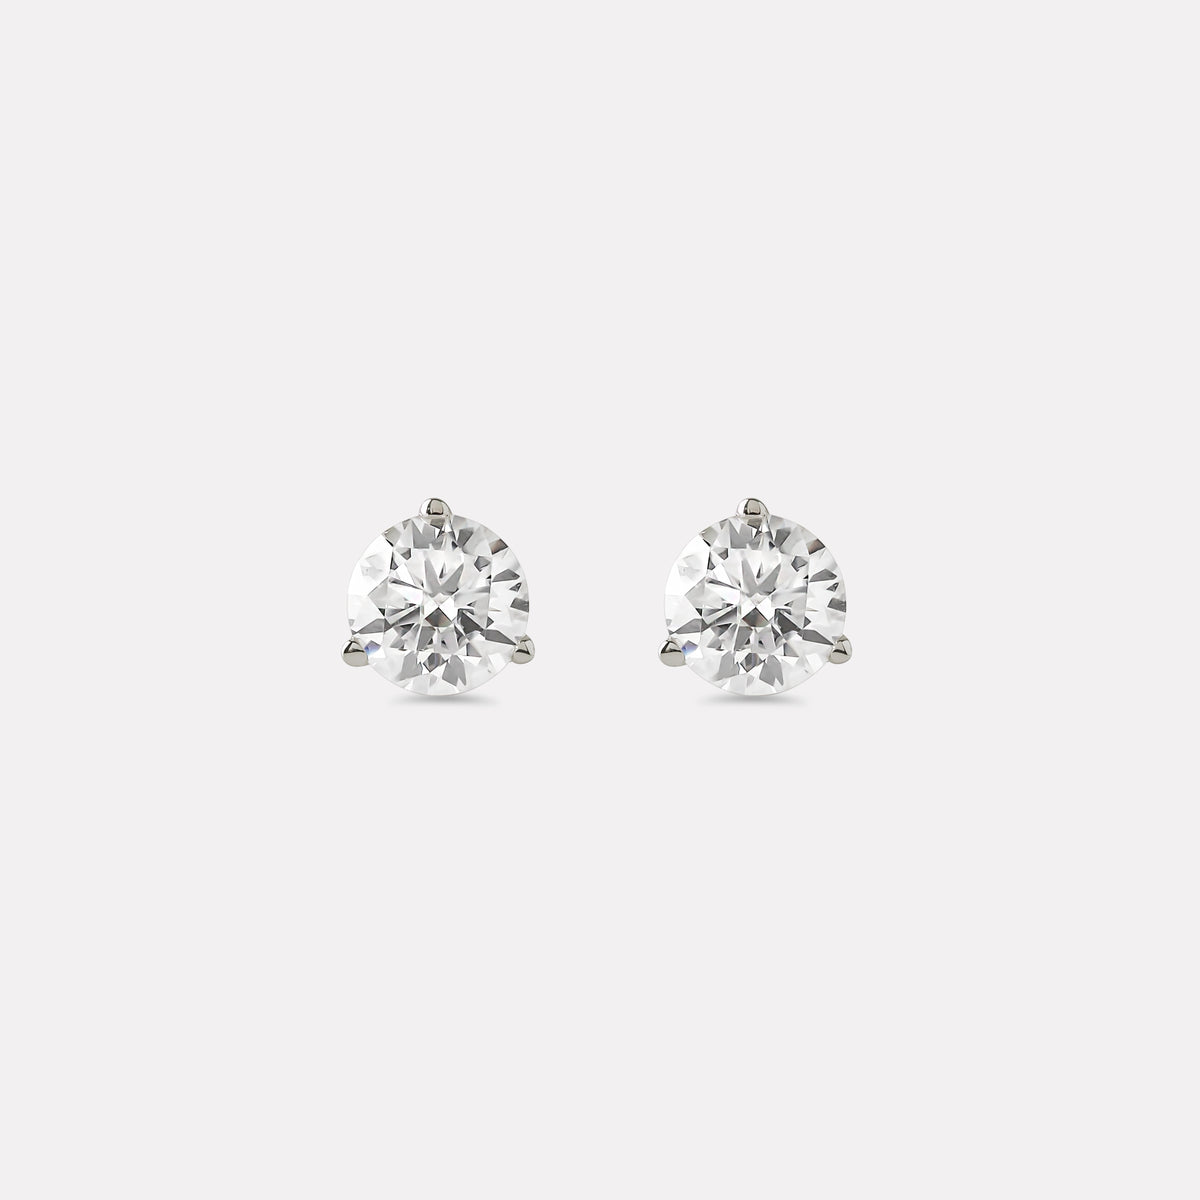 Round Brilliant Solitaire Earrings in Martini Setting